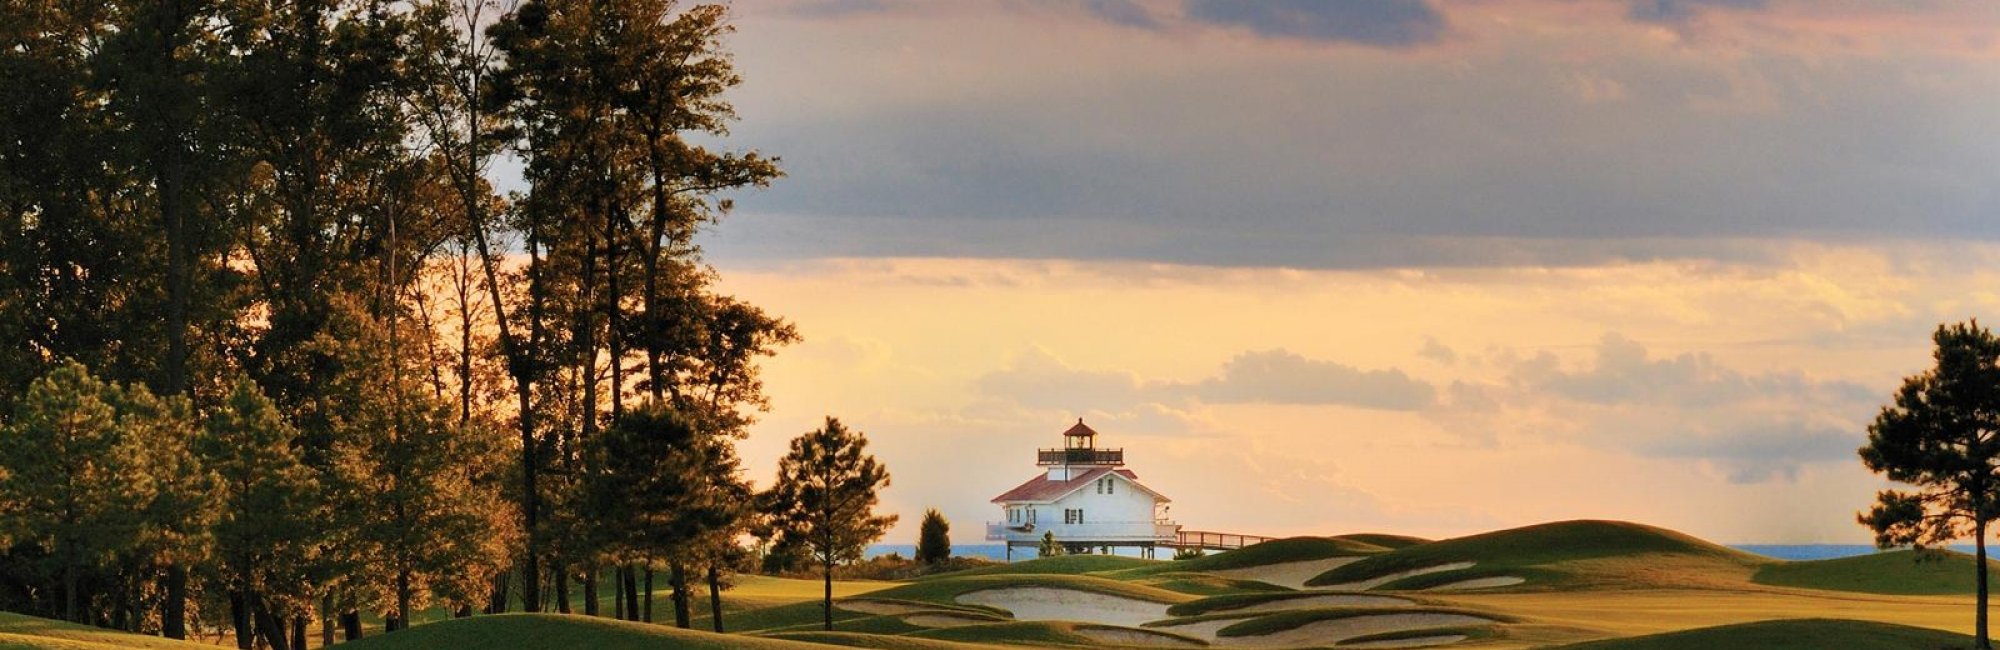 golf course with lighthouse and trees at sunset